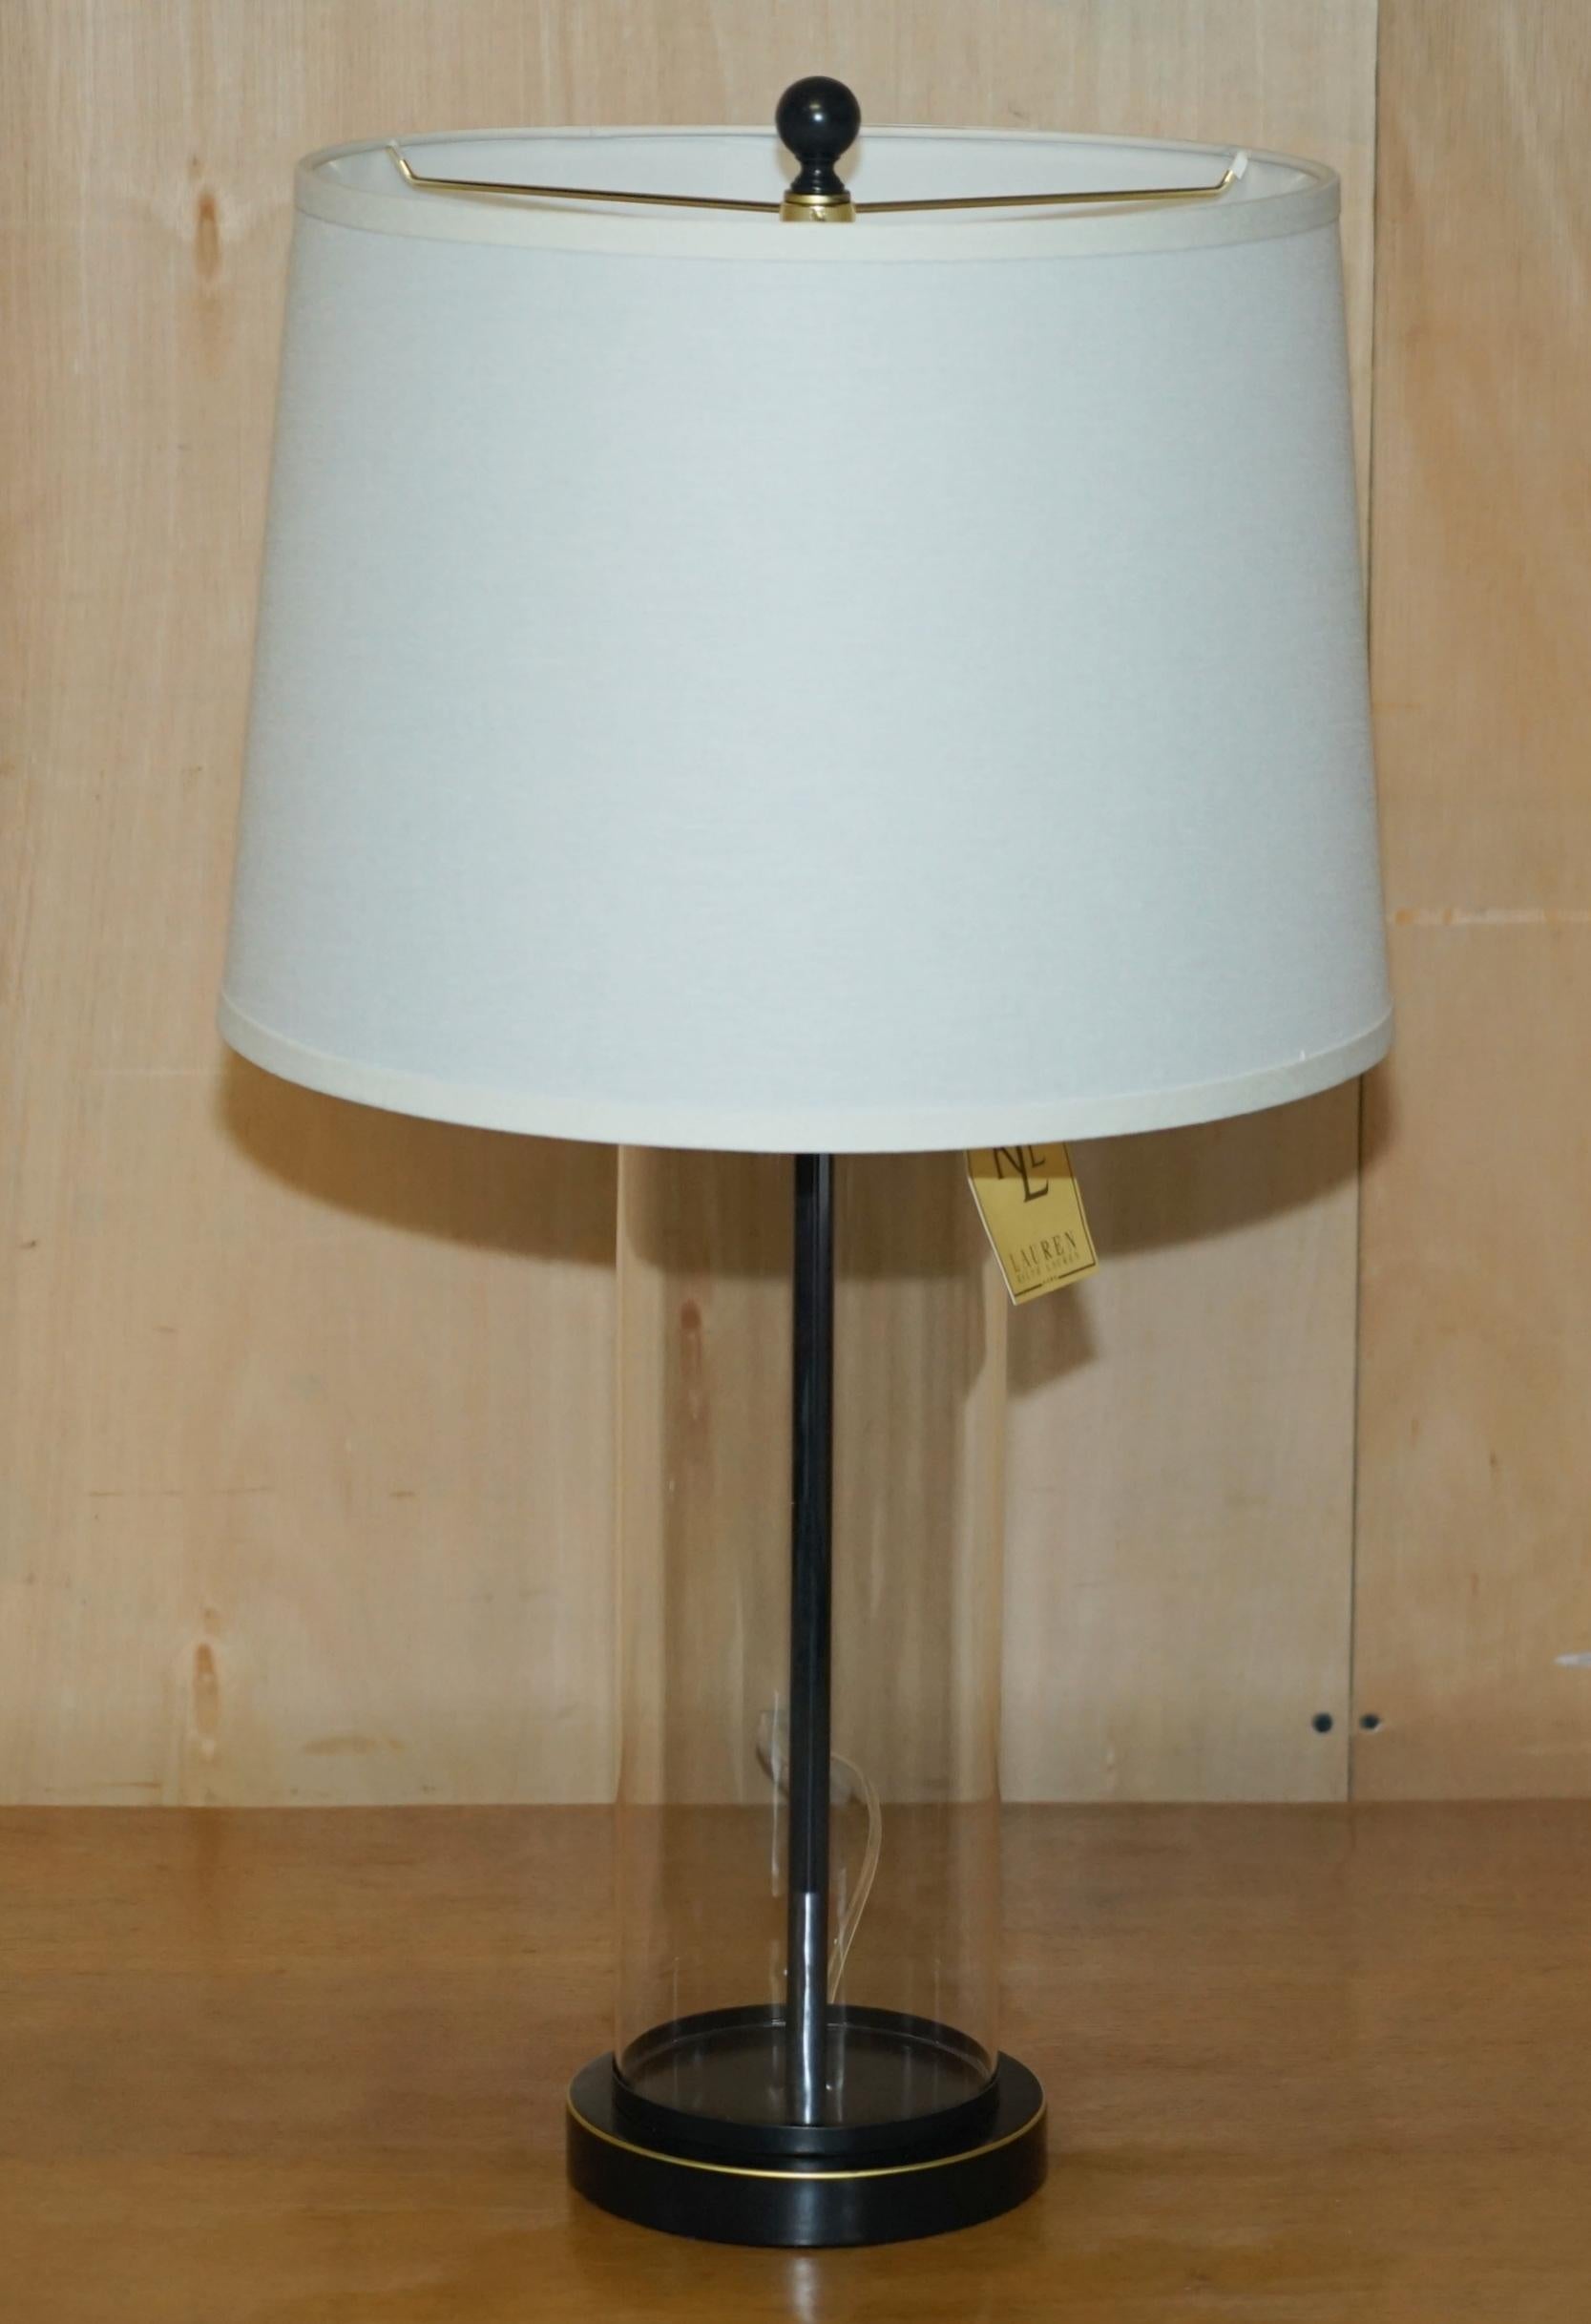 Art Deco 1 OF 2 BRAND NEW IN THE BOX RALPH LAUREN NAVY STORM LANTERN GLASS TABLE LAMPs For Sale